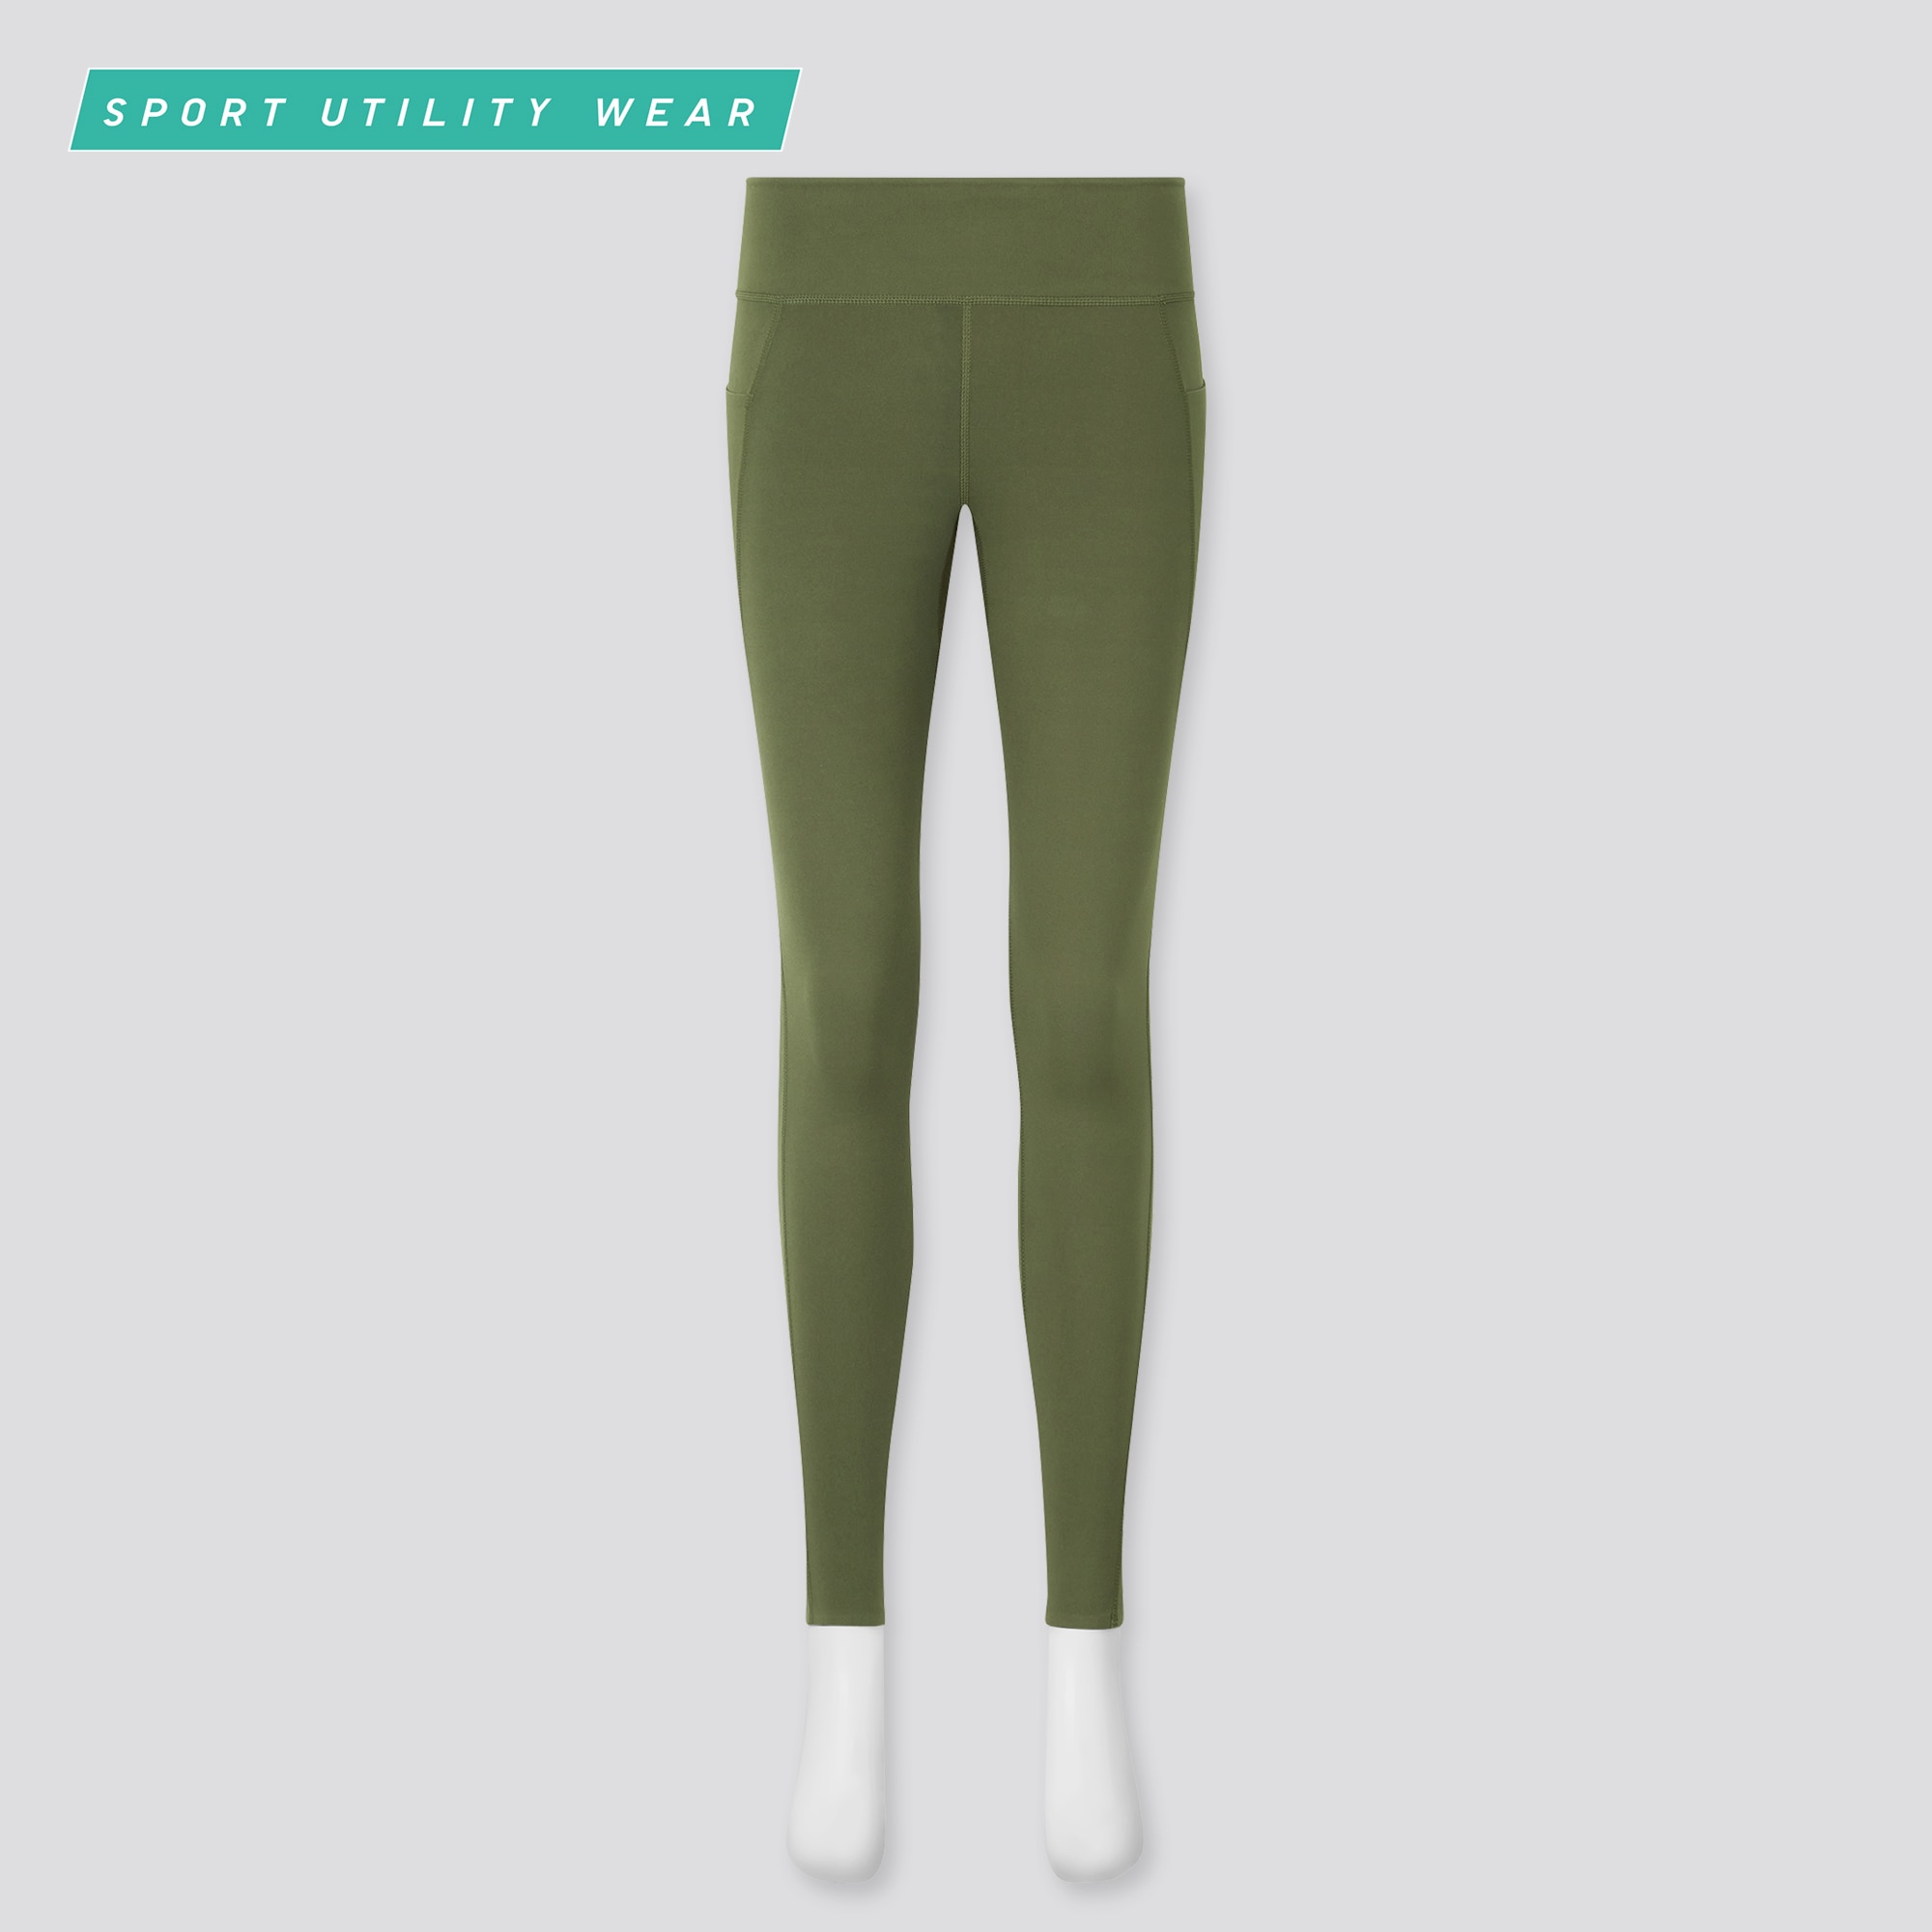 Check styling ideas for「AIRism UV Protection Active Soft Leggings